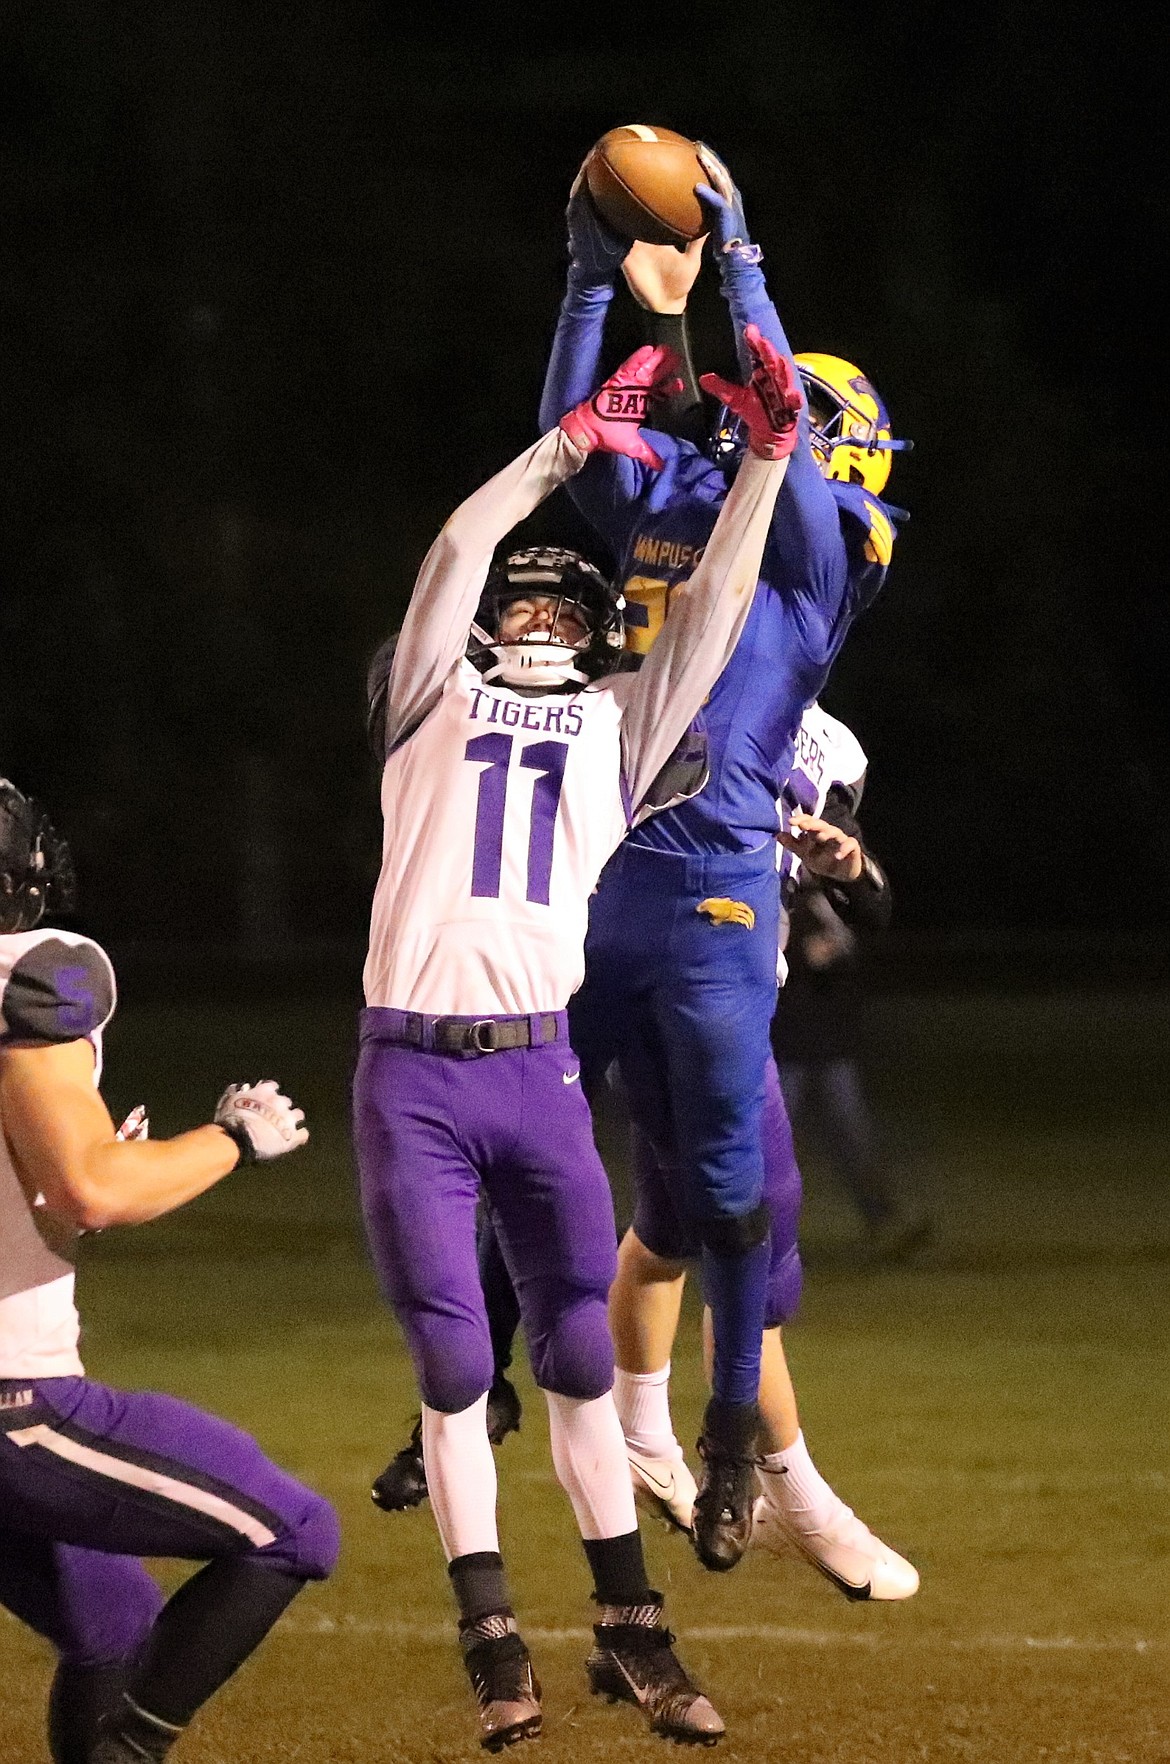 Senior Sam Barnett rises up to make a catch over a pair of Mullan defenders on a trick play during the second quarter of Friday's game.